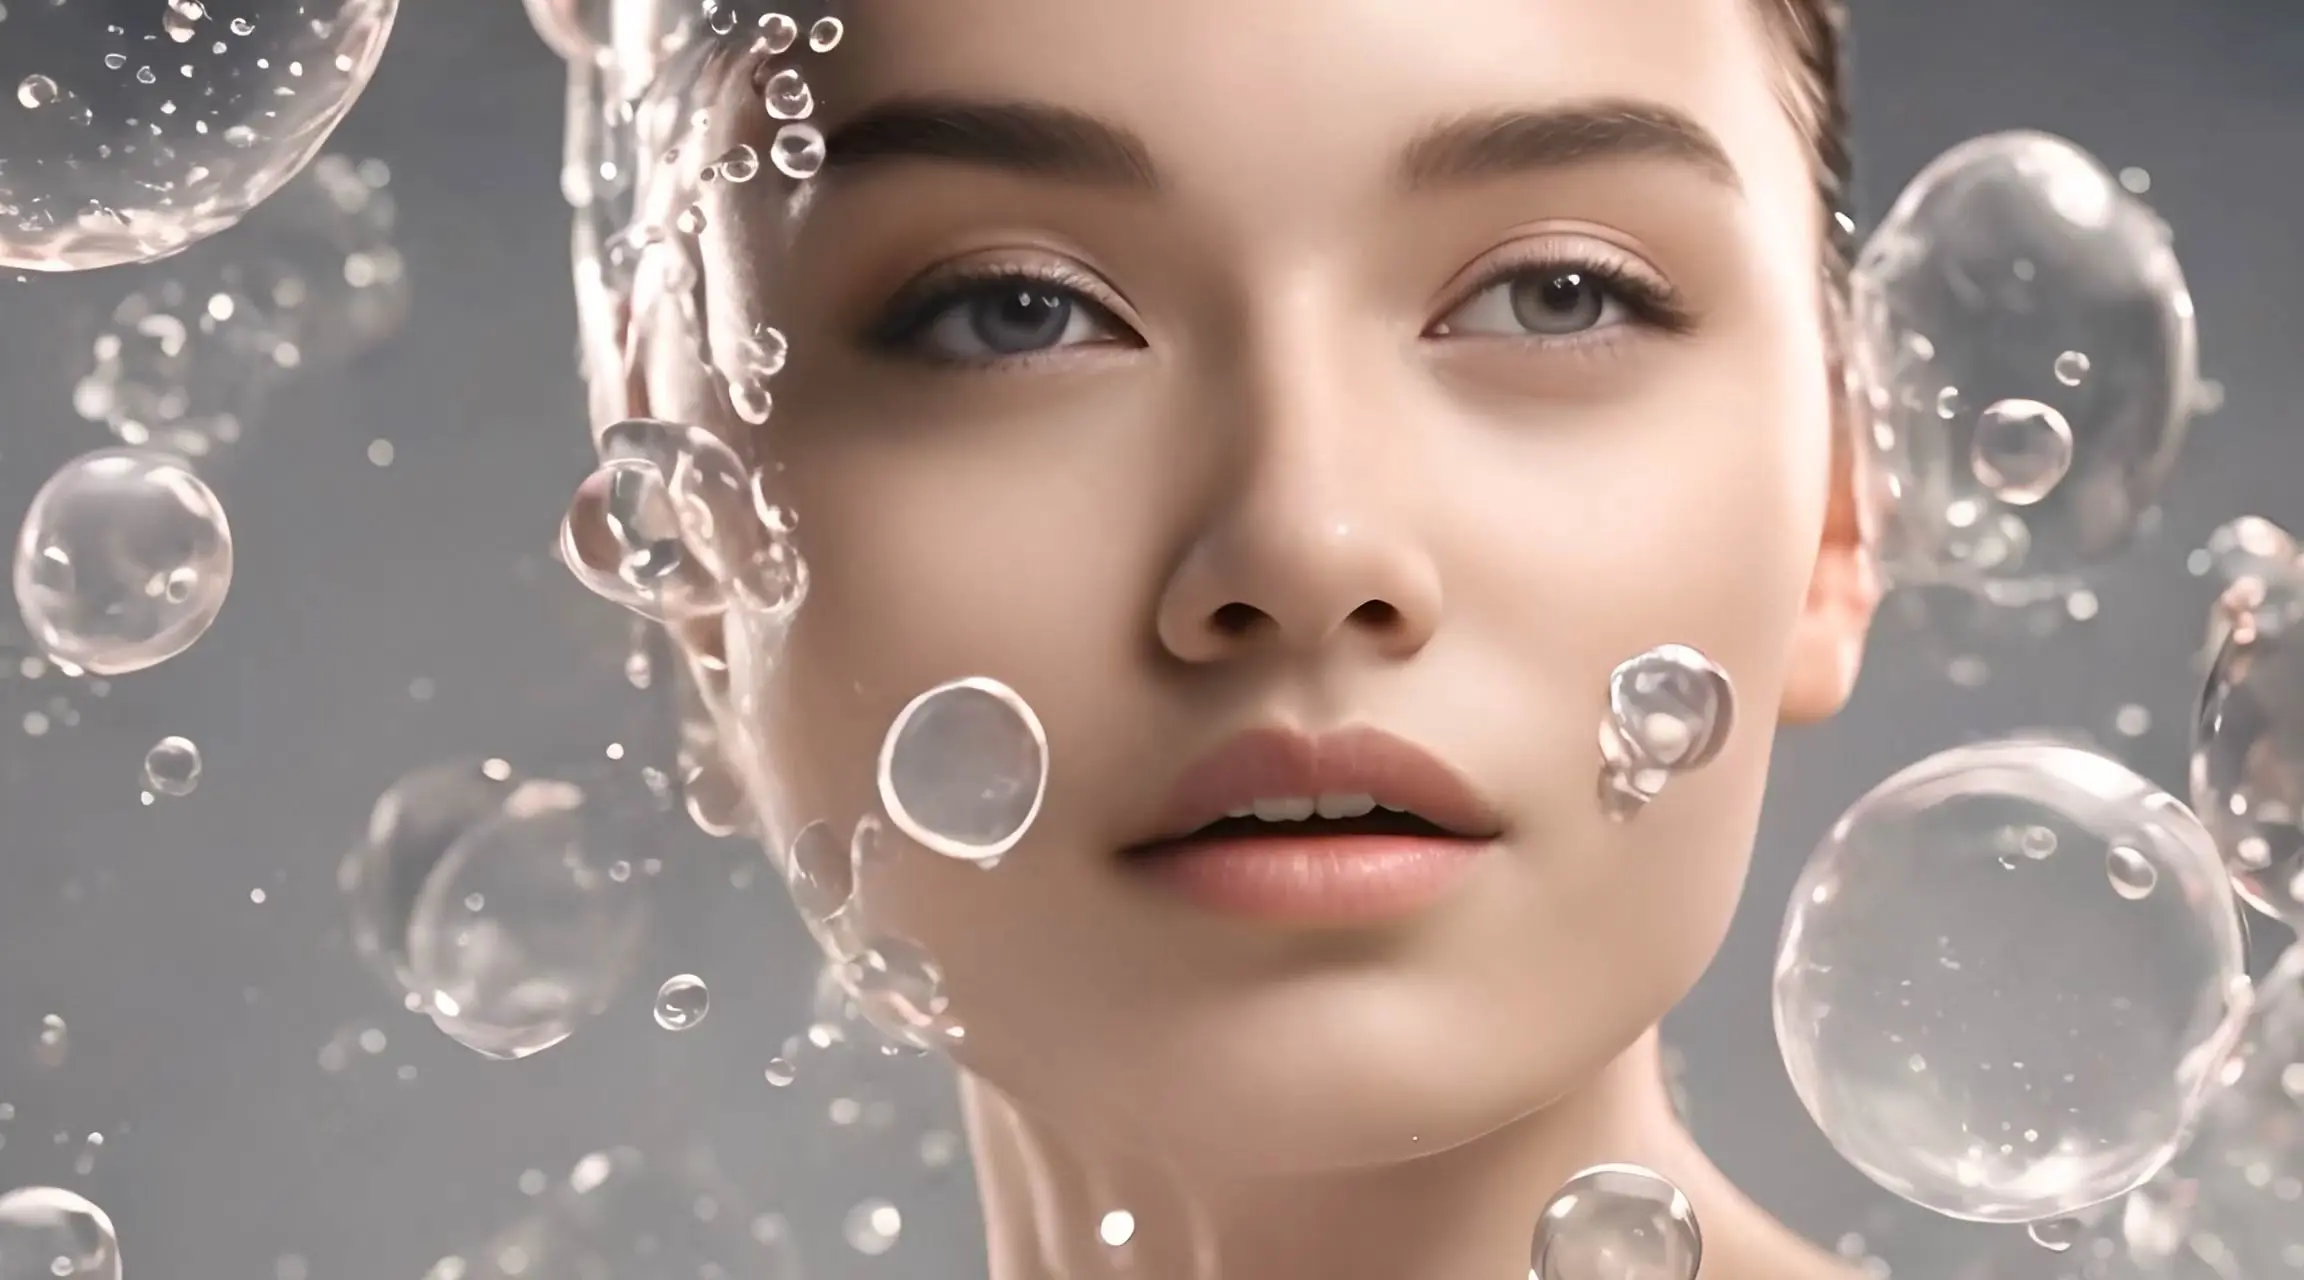 Woman with Water Bubbles on Her Face